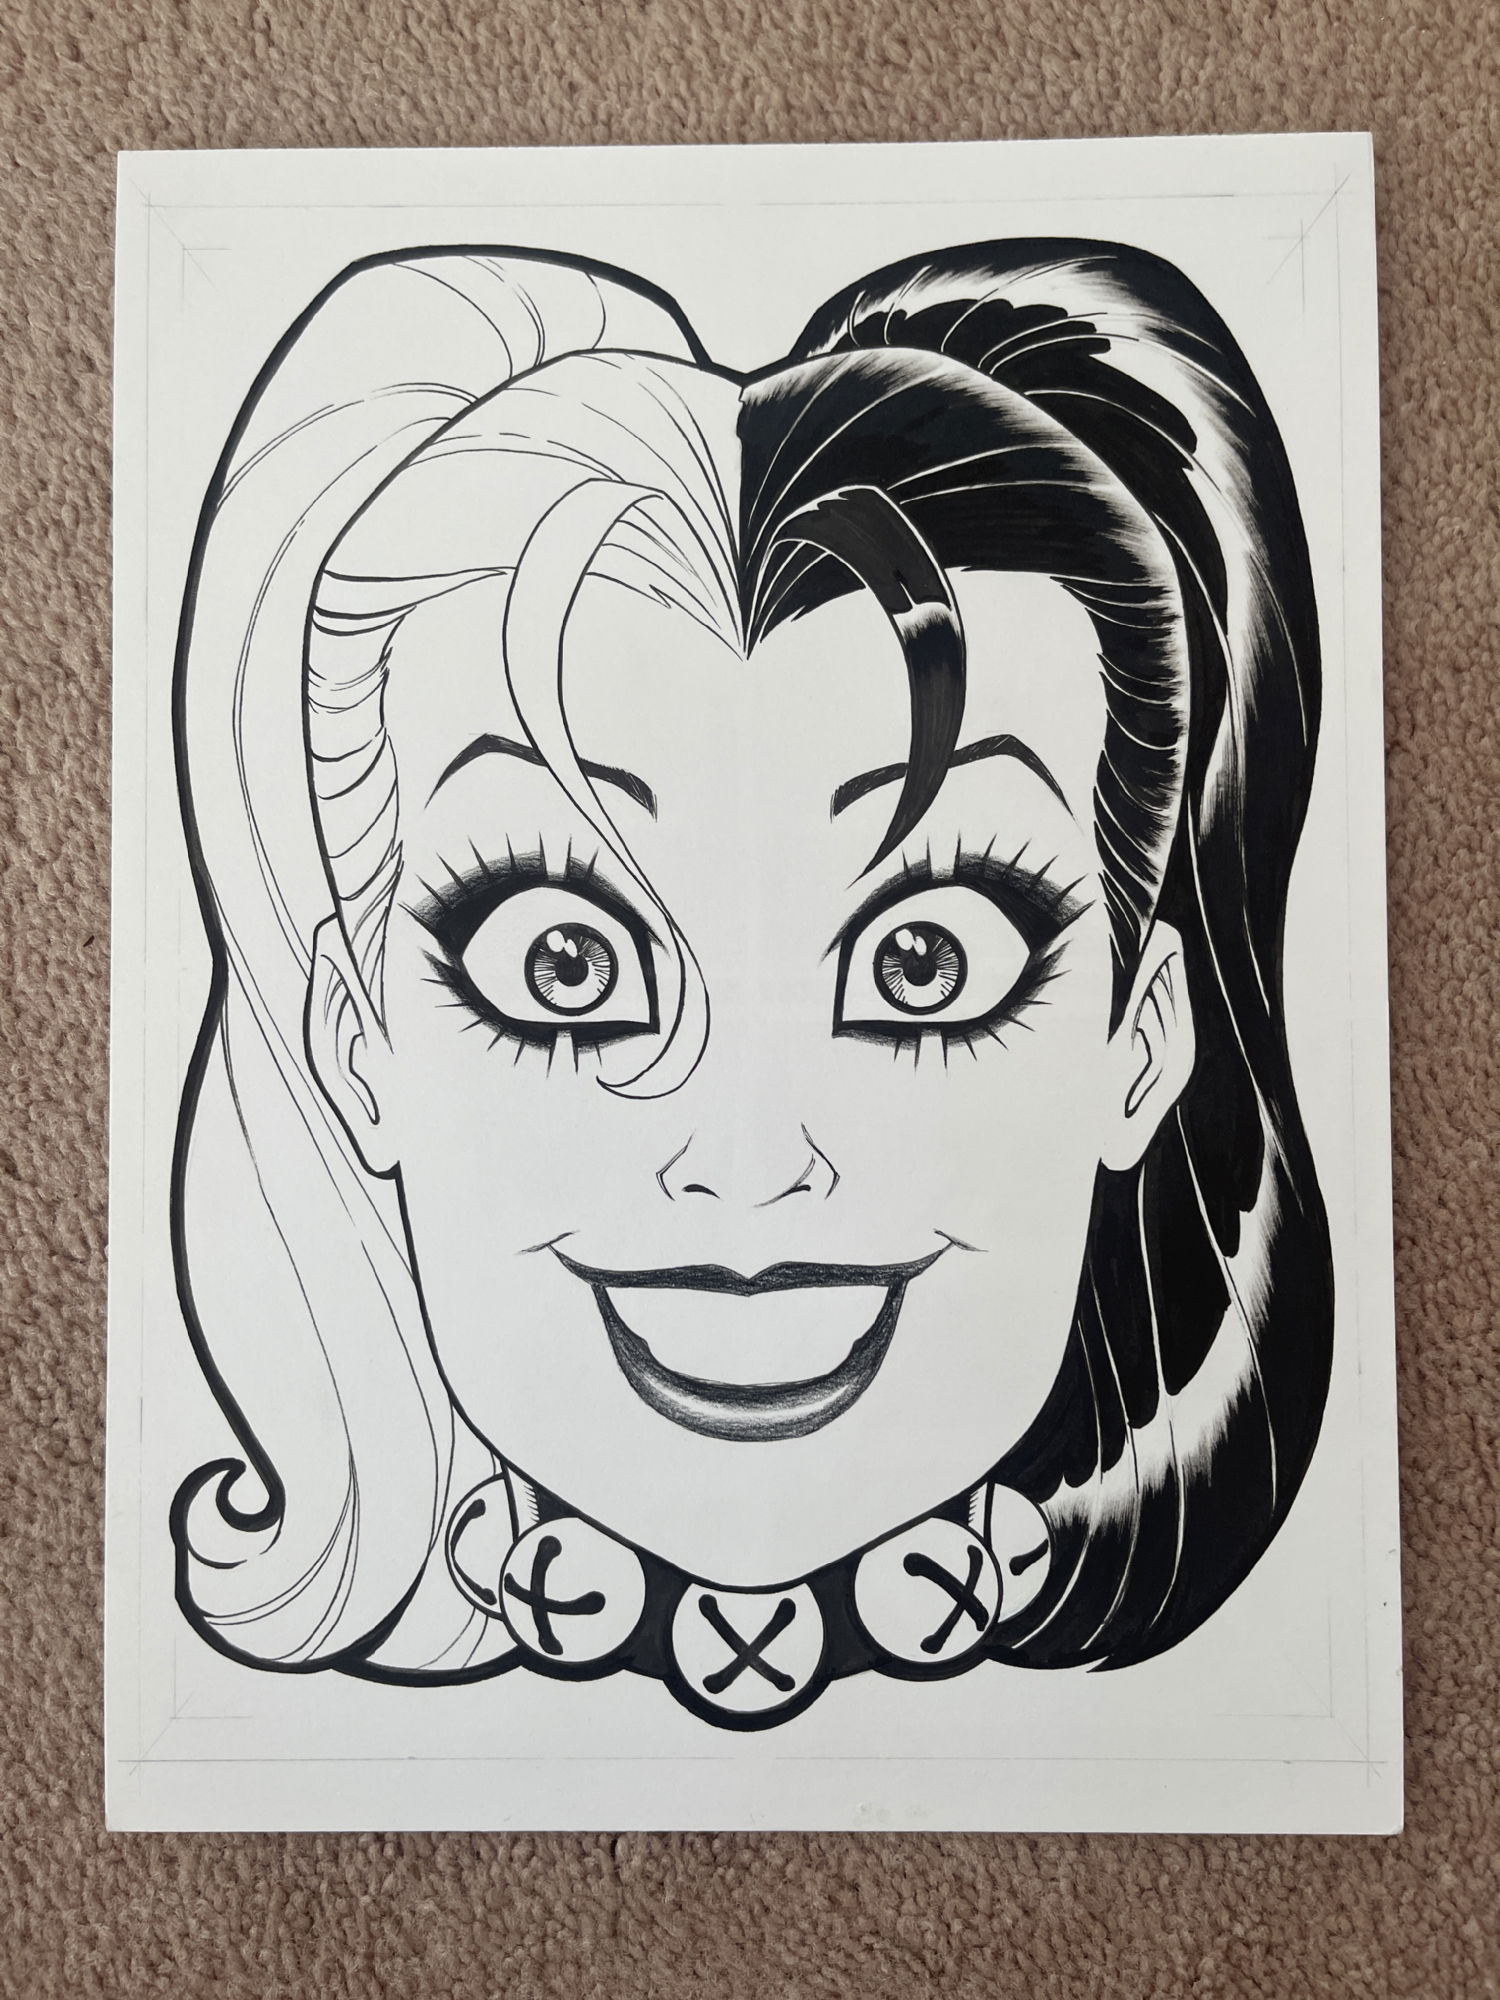 AMANDA CONNER HARLEY QUINN MASK ART, in Jimmy Palmiotti's Showing some ...